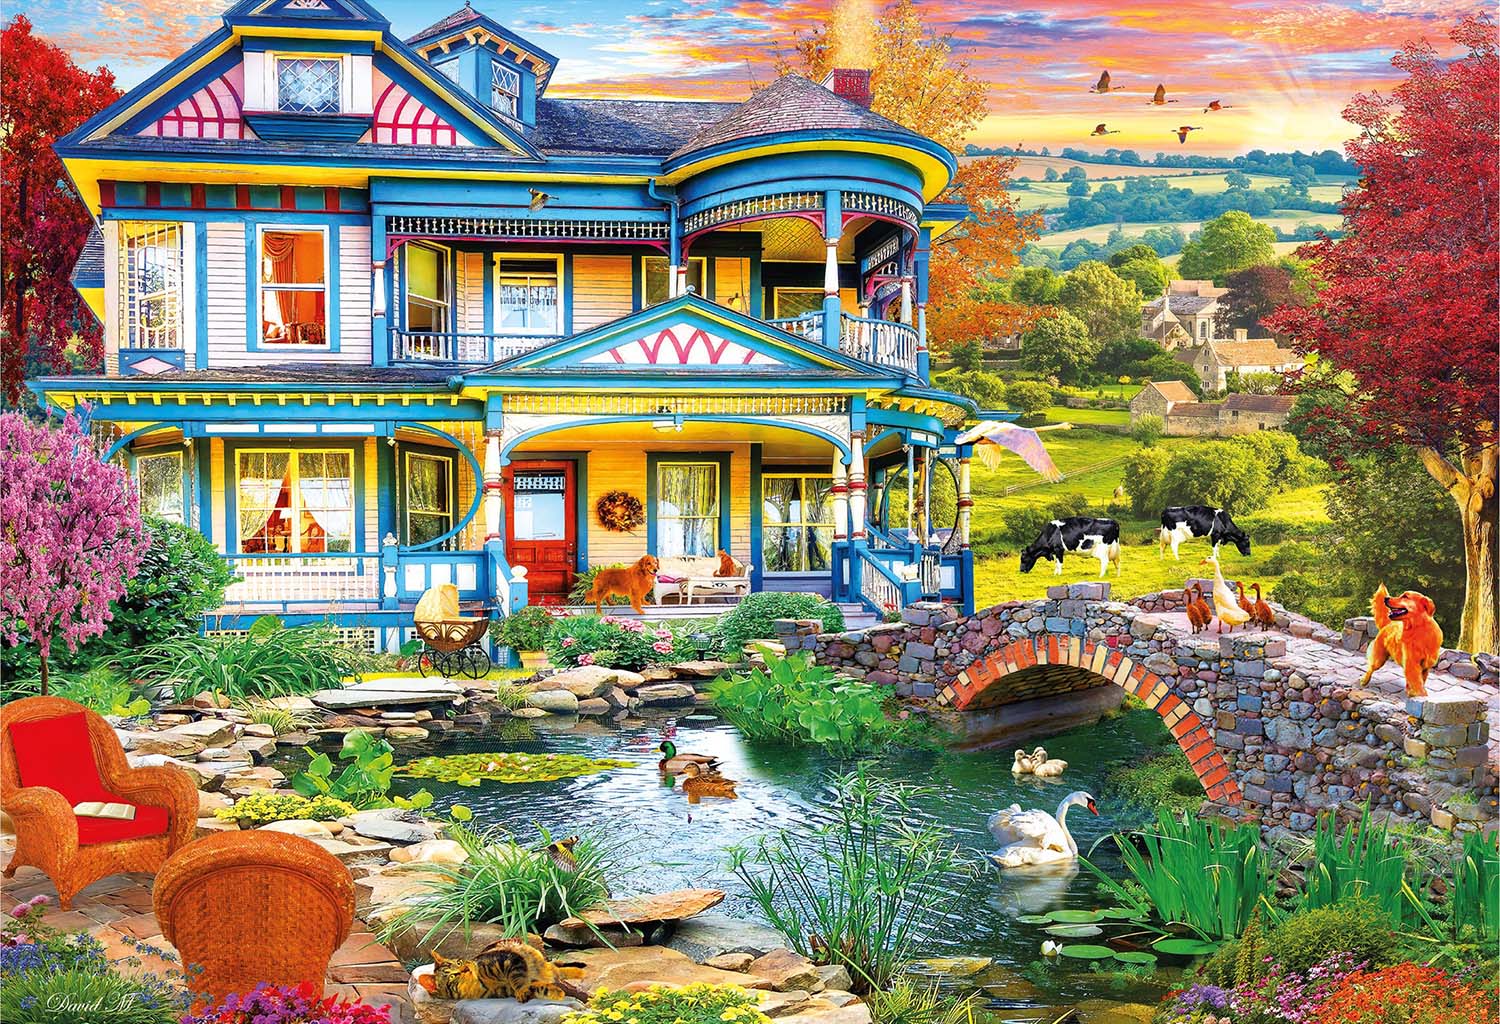 Country Home - Scratch and Dent Landscape Jigsaw Puzzle